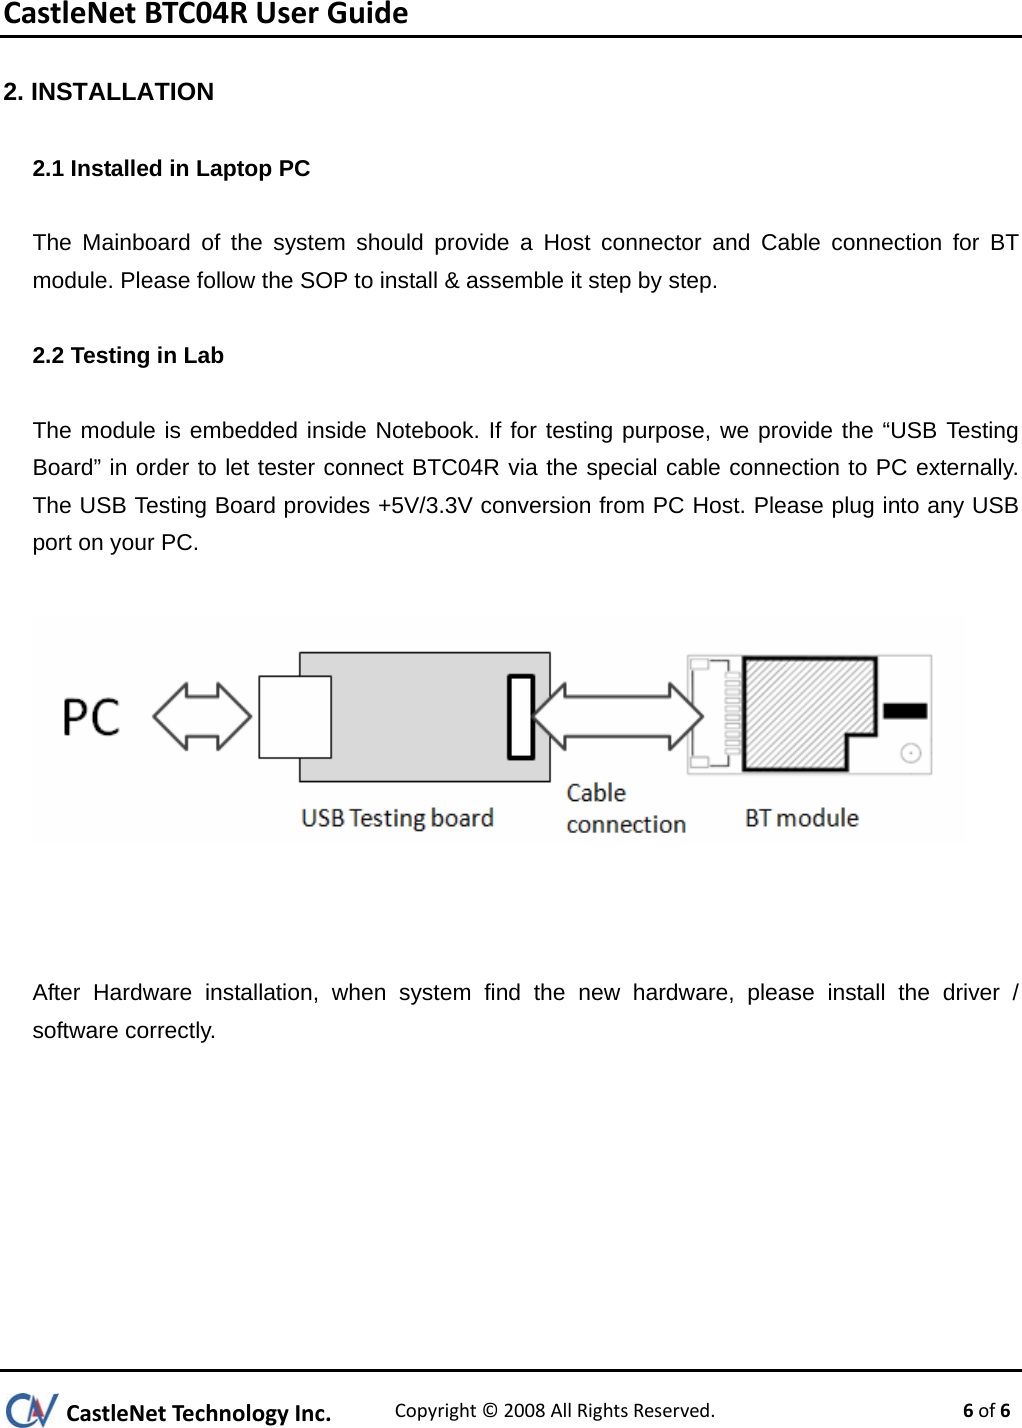 CastleNetBTC04RUserGuide2. INSTALLATION 2.1 Installed in Laptop PC  The Mainboard of the system should provide a Host connector and Cable connection for BT module. Please follow the SOP to install &amp; assemble it step by step.  2.2 Testing in Lab  The module is embedded inside Notebook. If for testing purpose, we provide the “USB Testing Board” in order to let tester connect BTC04R via the special cable connection to PC externally. The USB Testing Board provides +5V/3.3V conversion from PC Host. Please plug into any USB port on your PC.      After Hardware installation, when system find the new hardware, please install the driver / software correctly.   CastleNetTechnologyInc.Copyright©2008AllRightsReserved. 6of6